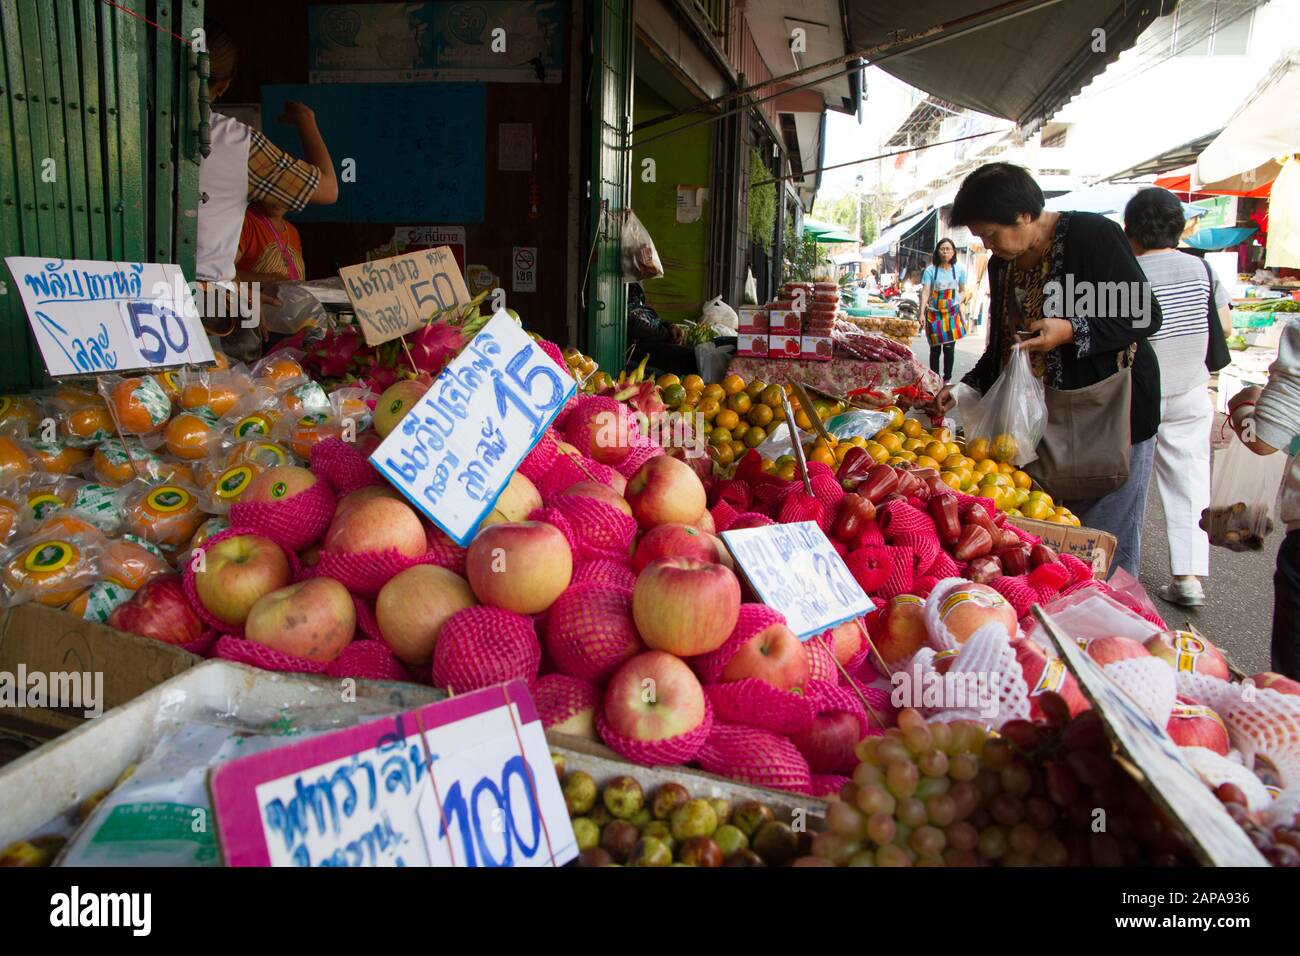 Thailand Chiang Mai Market fruits stall price tags Stock Photo